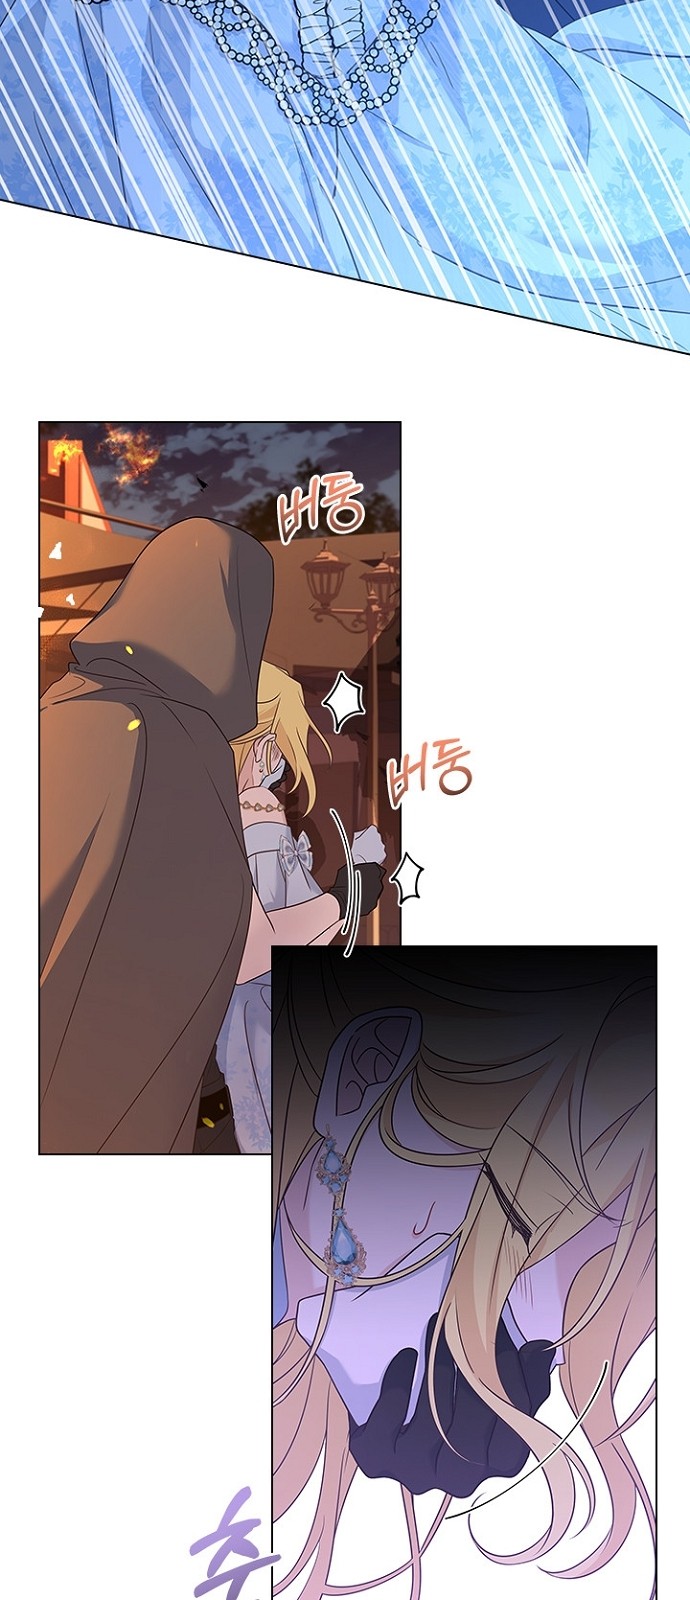 His Majesty's Proposal (A Night With the Emperor) - Chapter 79 - Page 2